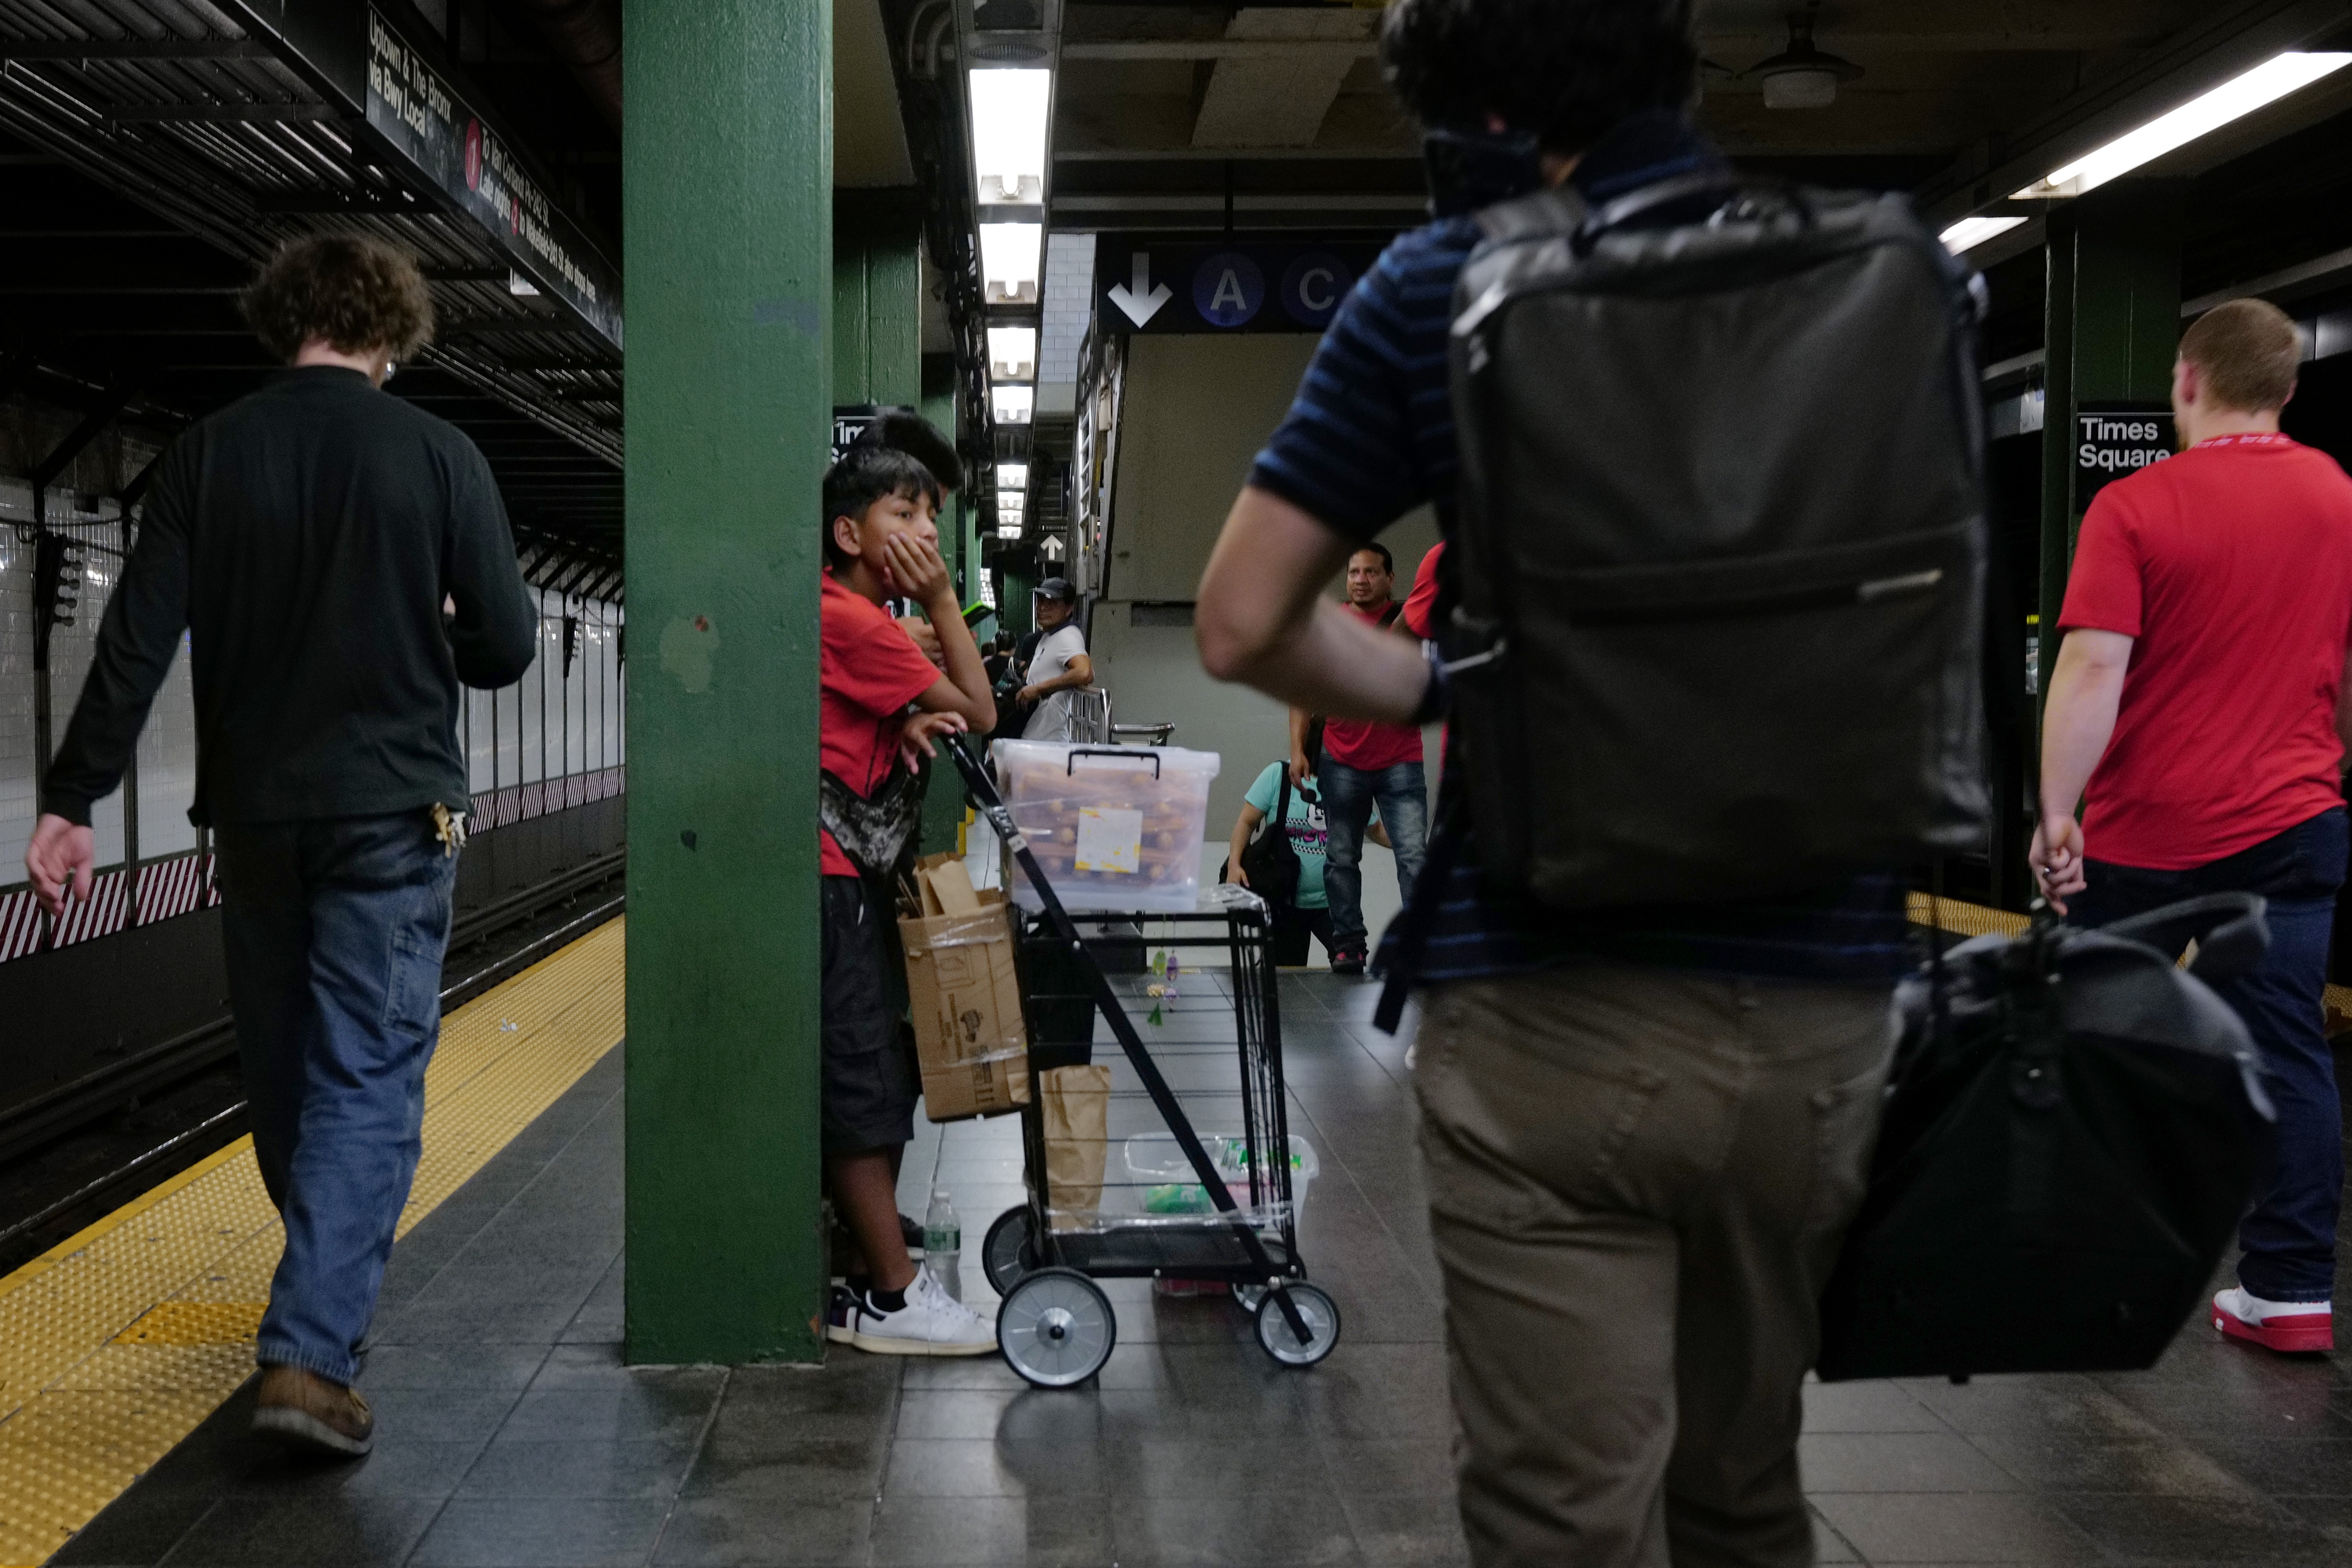 NEWSLINE: Why are so many migrant kids selling candy on the subway?